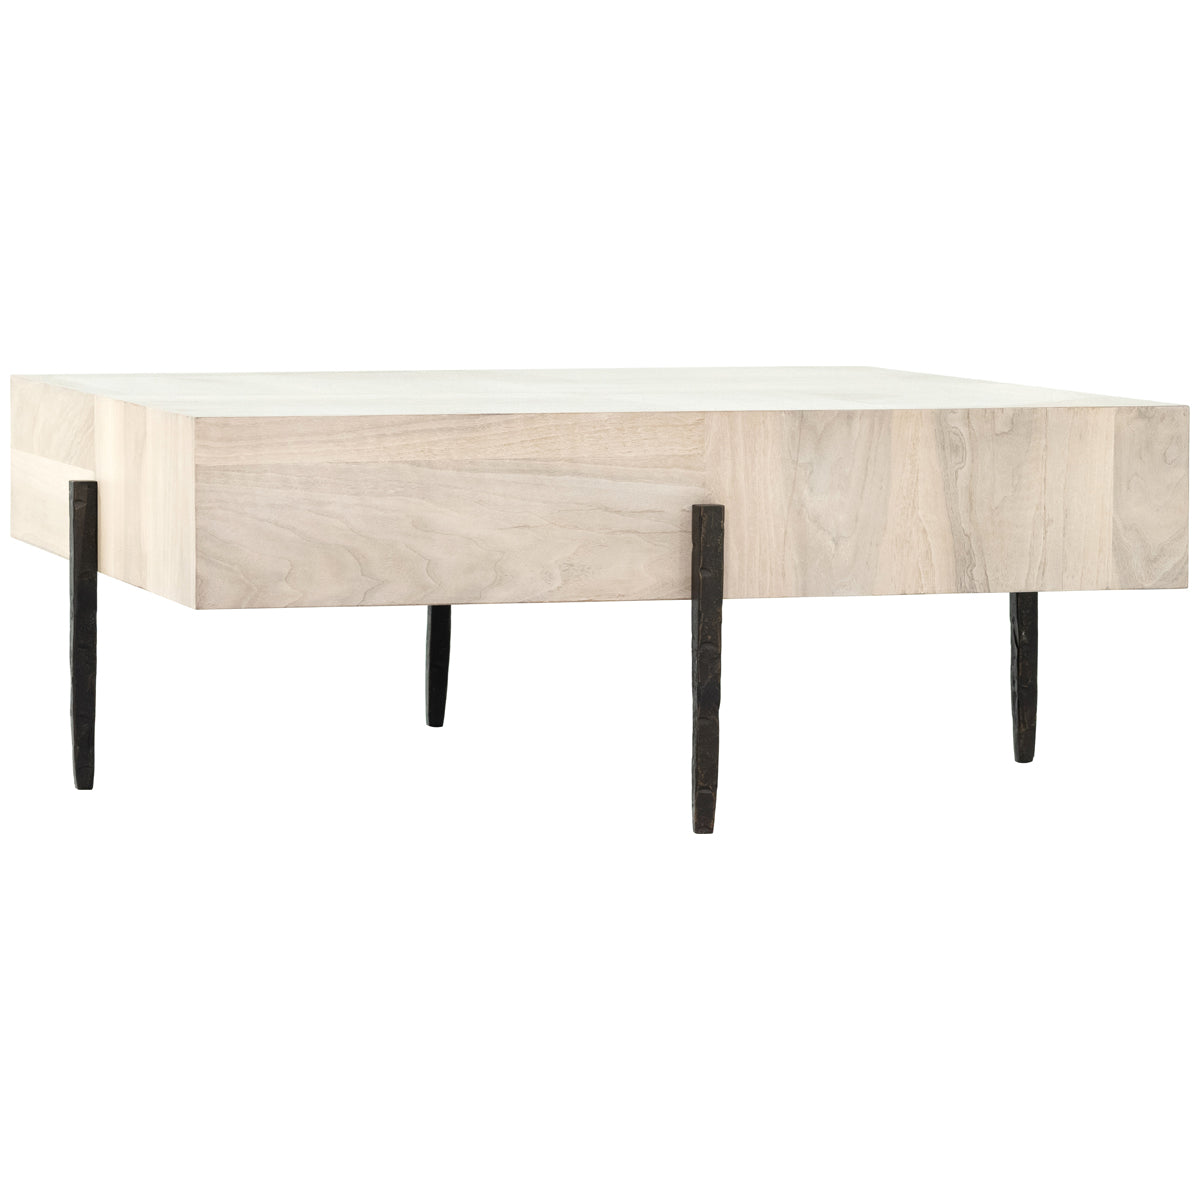 Four Hands Wesson Indra Square Coffee Table - Ashen Walnut